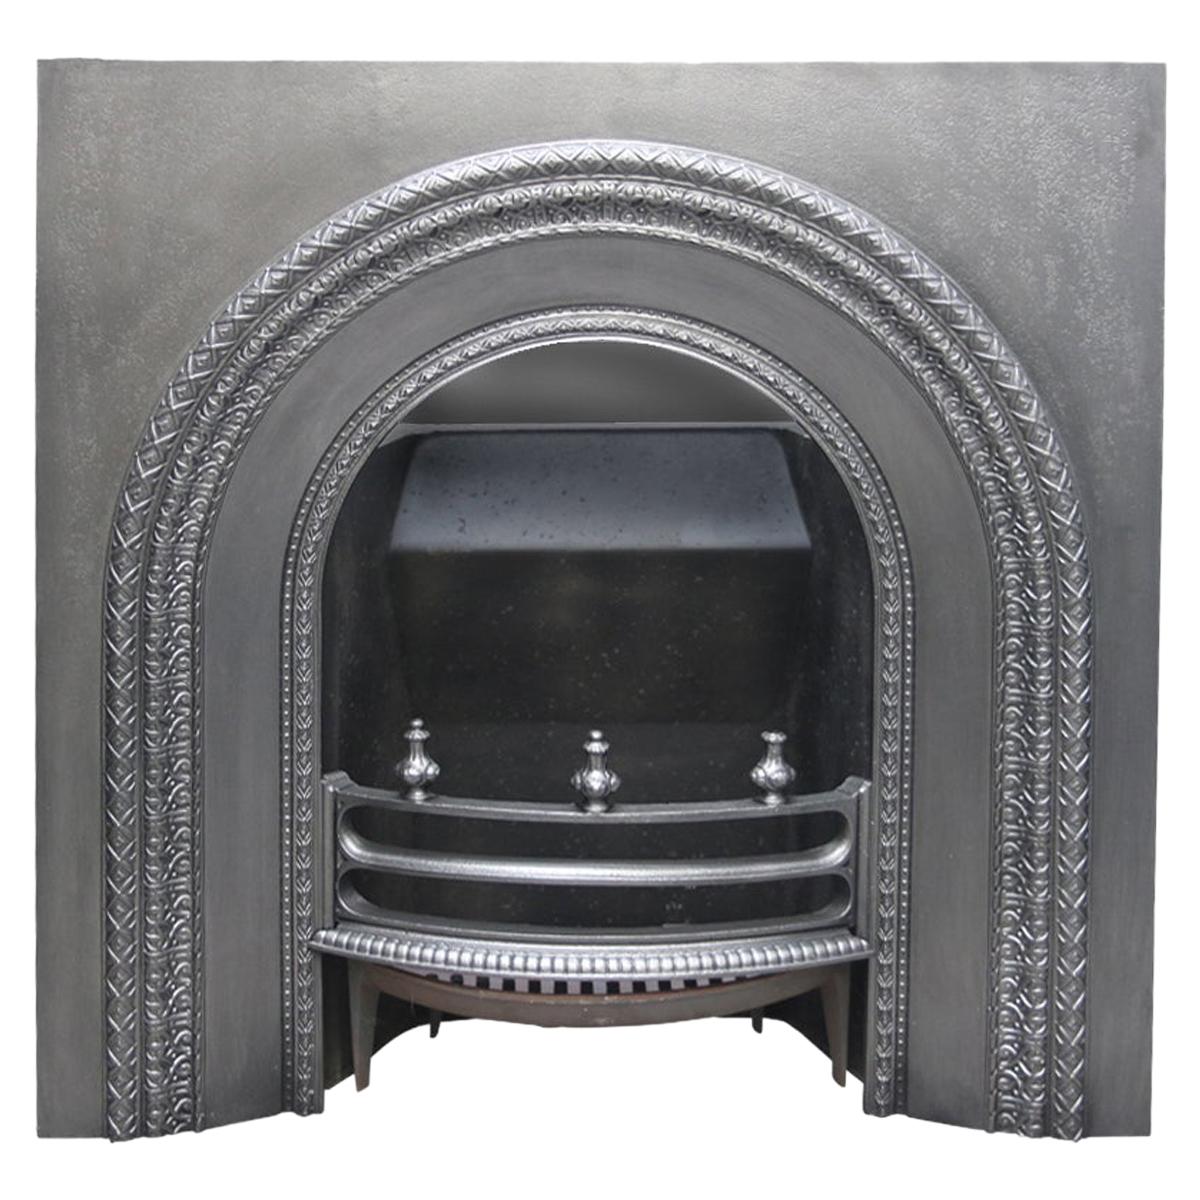 Reclaimed Victorian Cast Iron Fireplace Insert with Arched Aperture